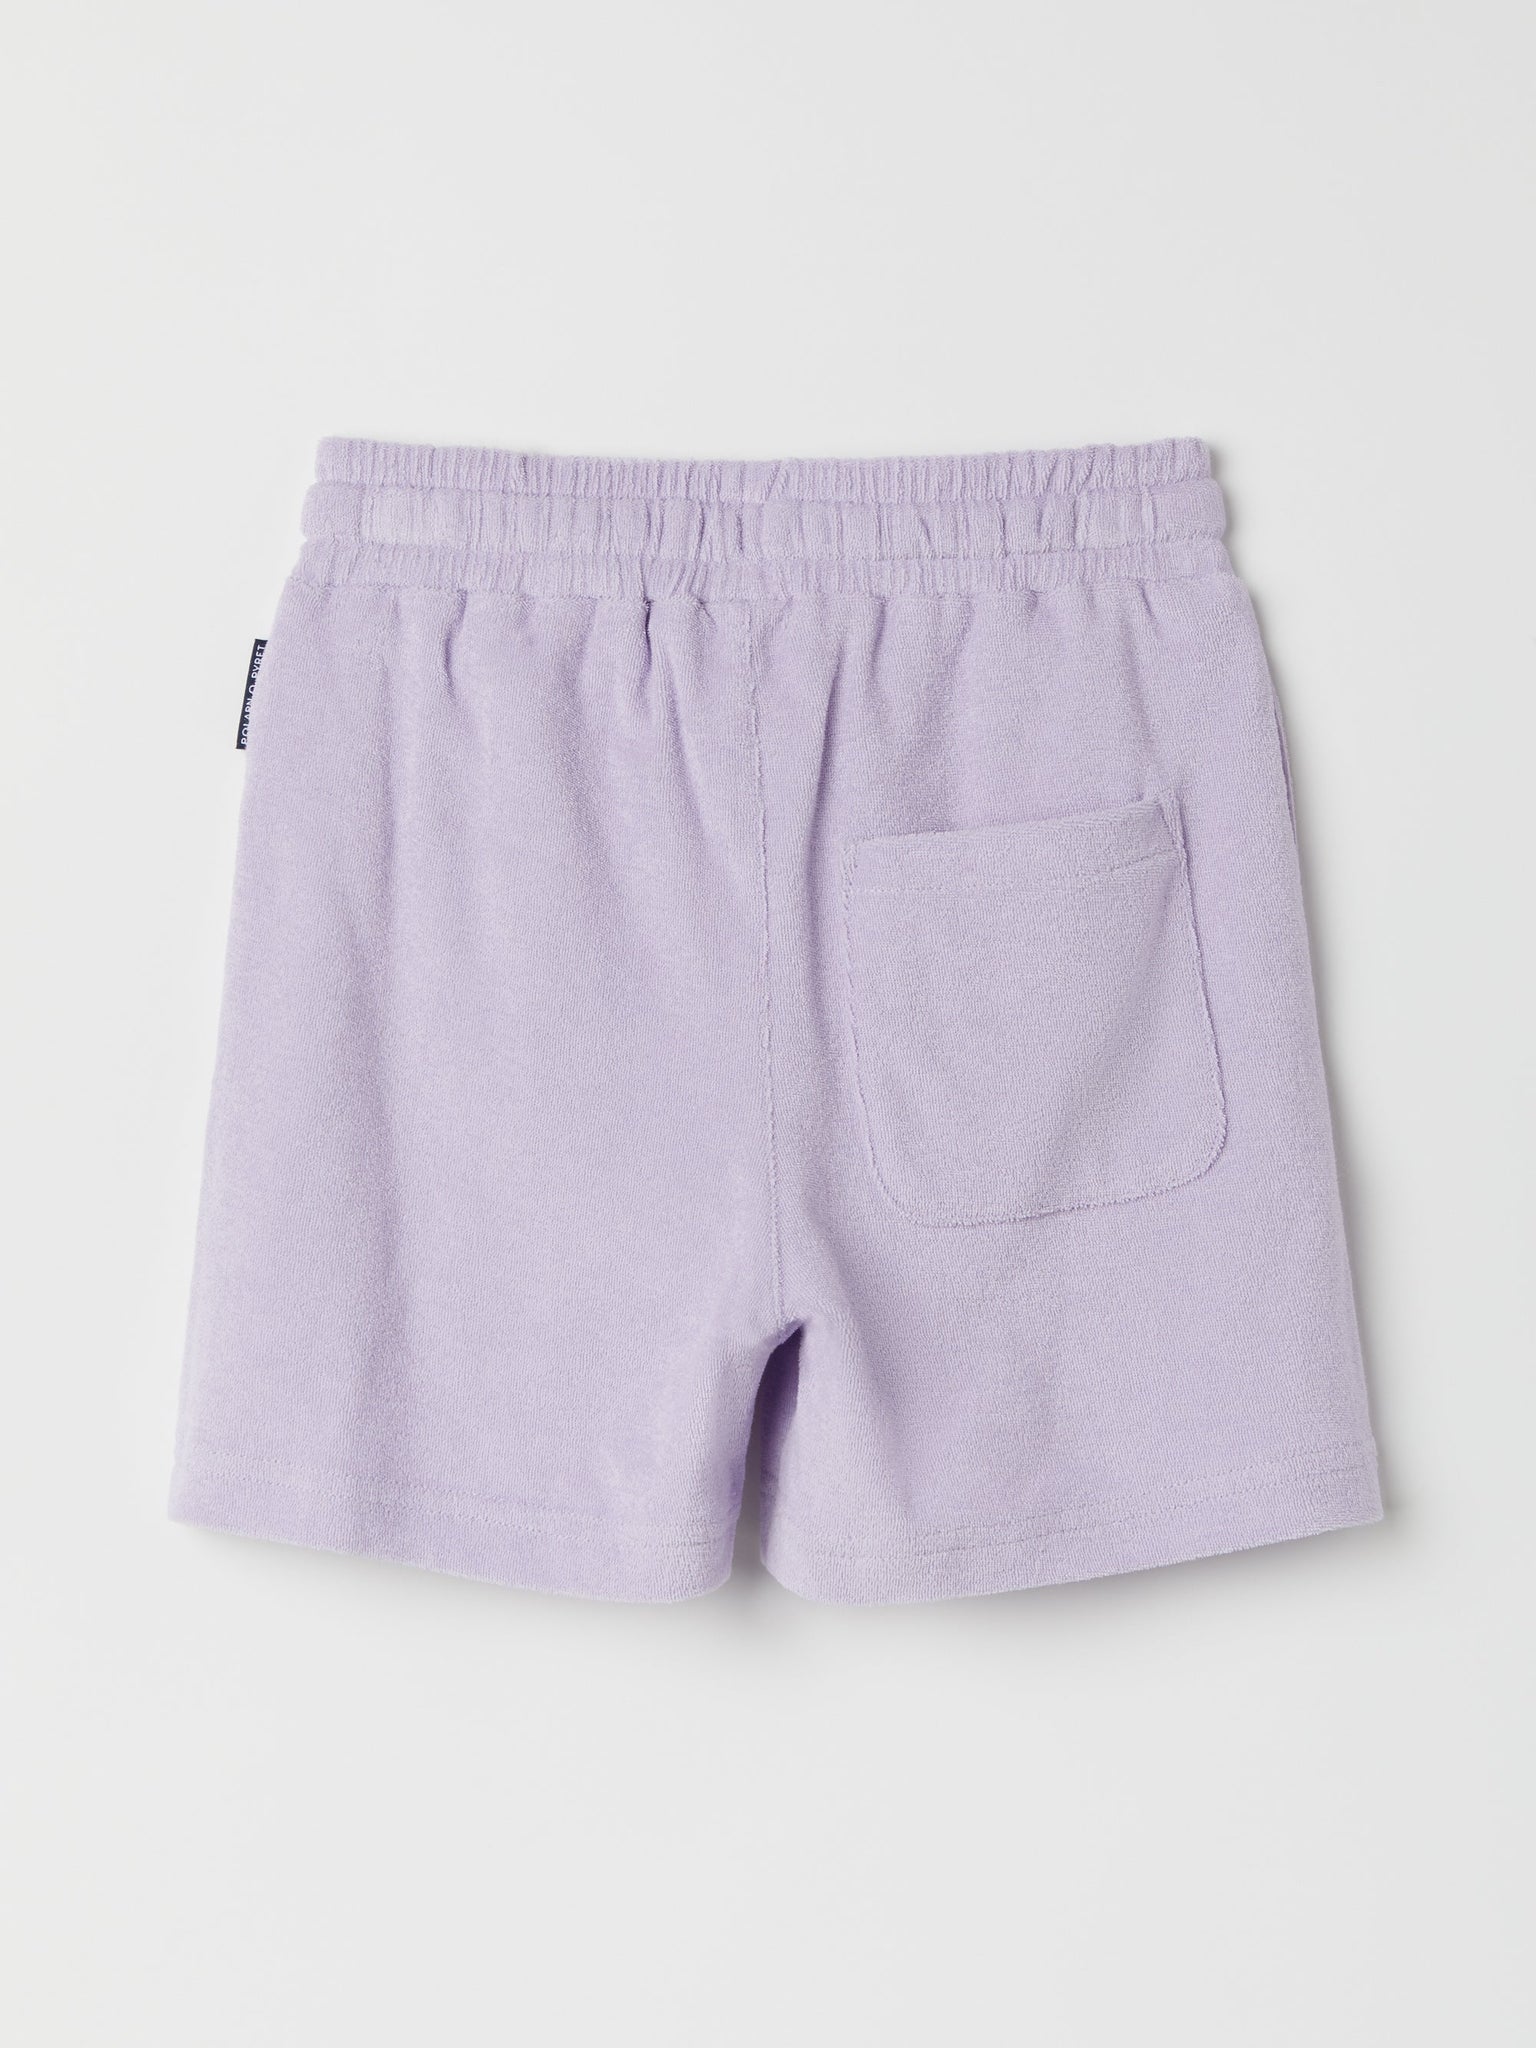 Purple Terry Cotton Kids Shorts from the Polarn O. Pyret kidswear collection. Clothes made using sustainably sourced materials.